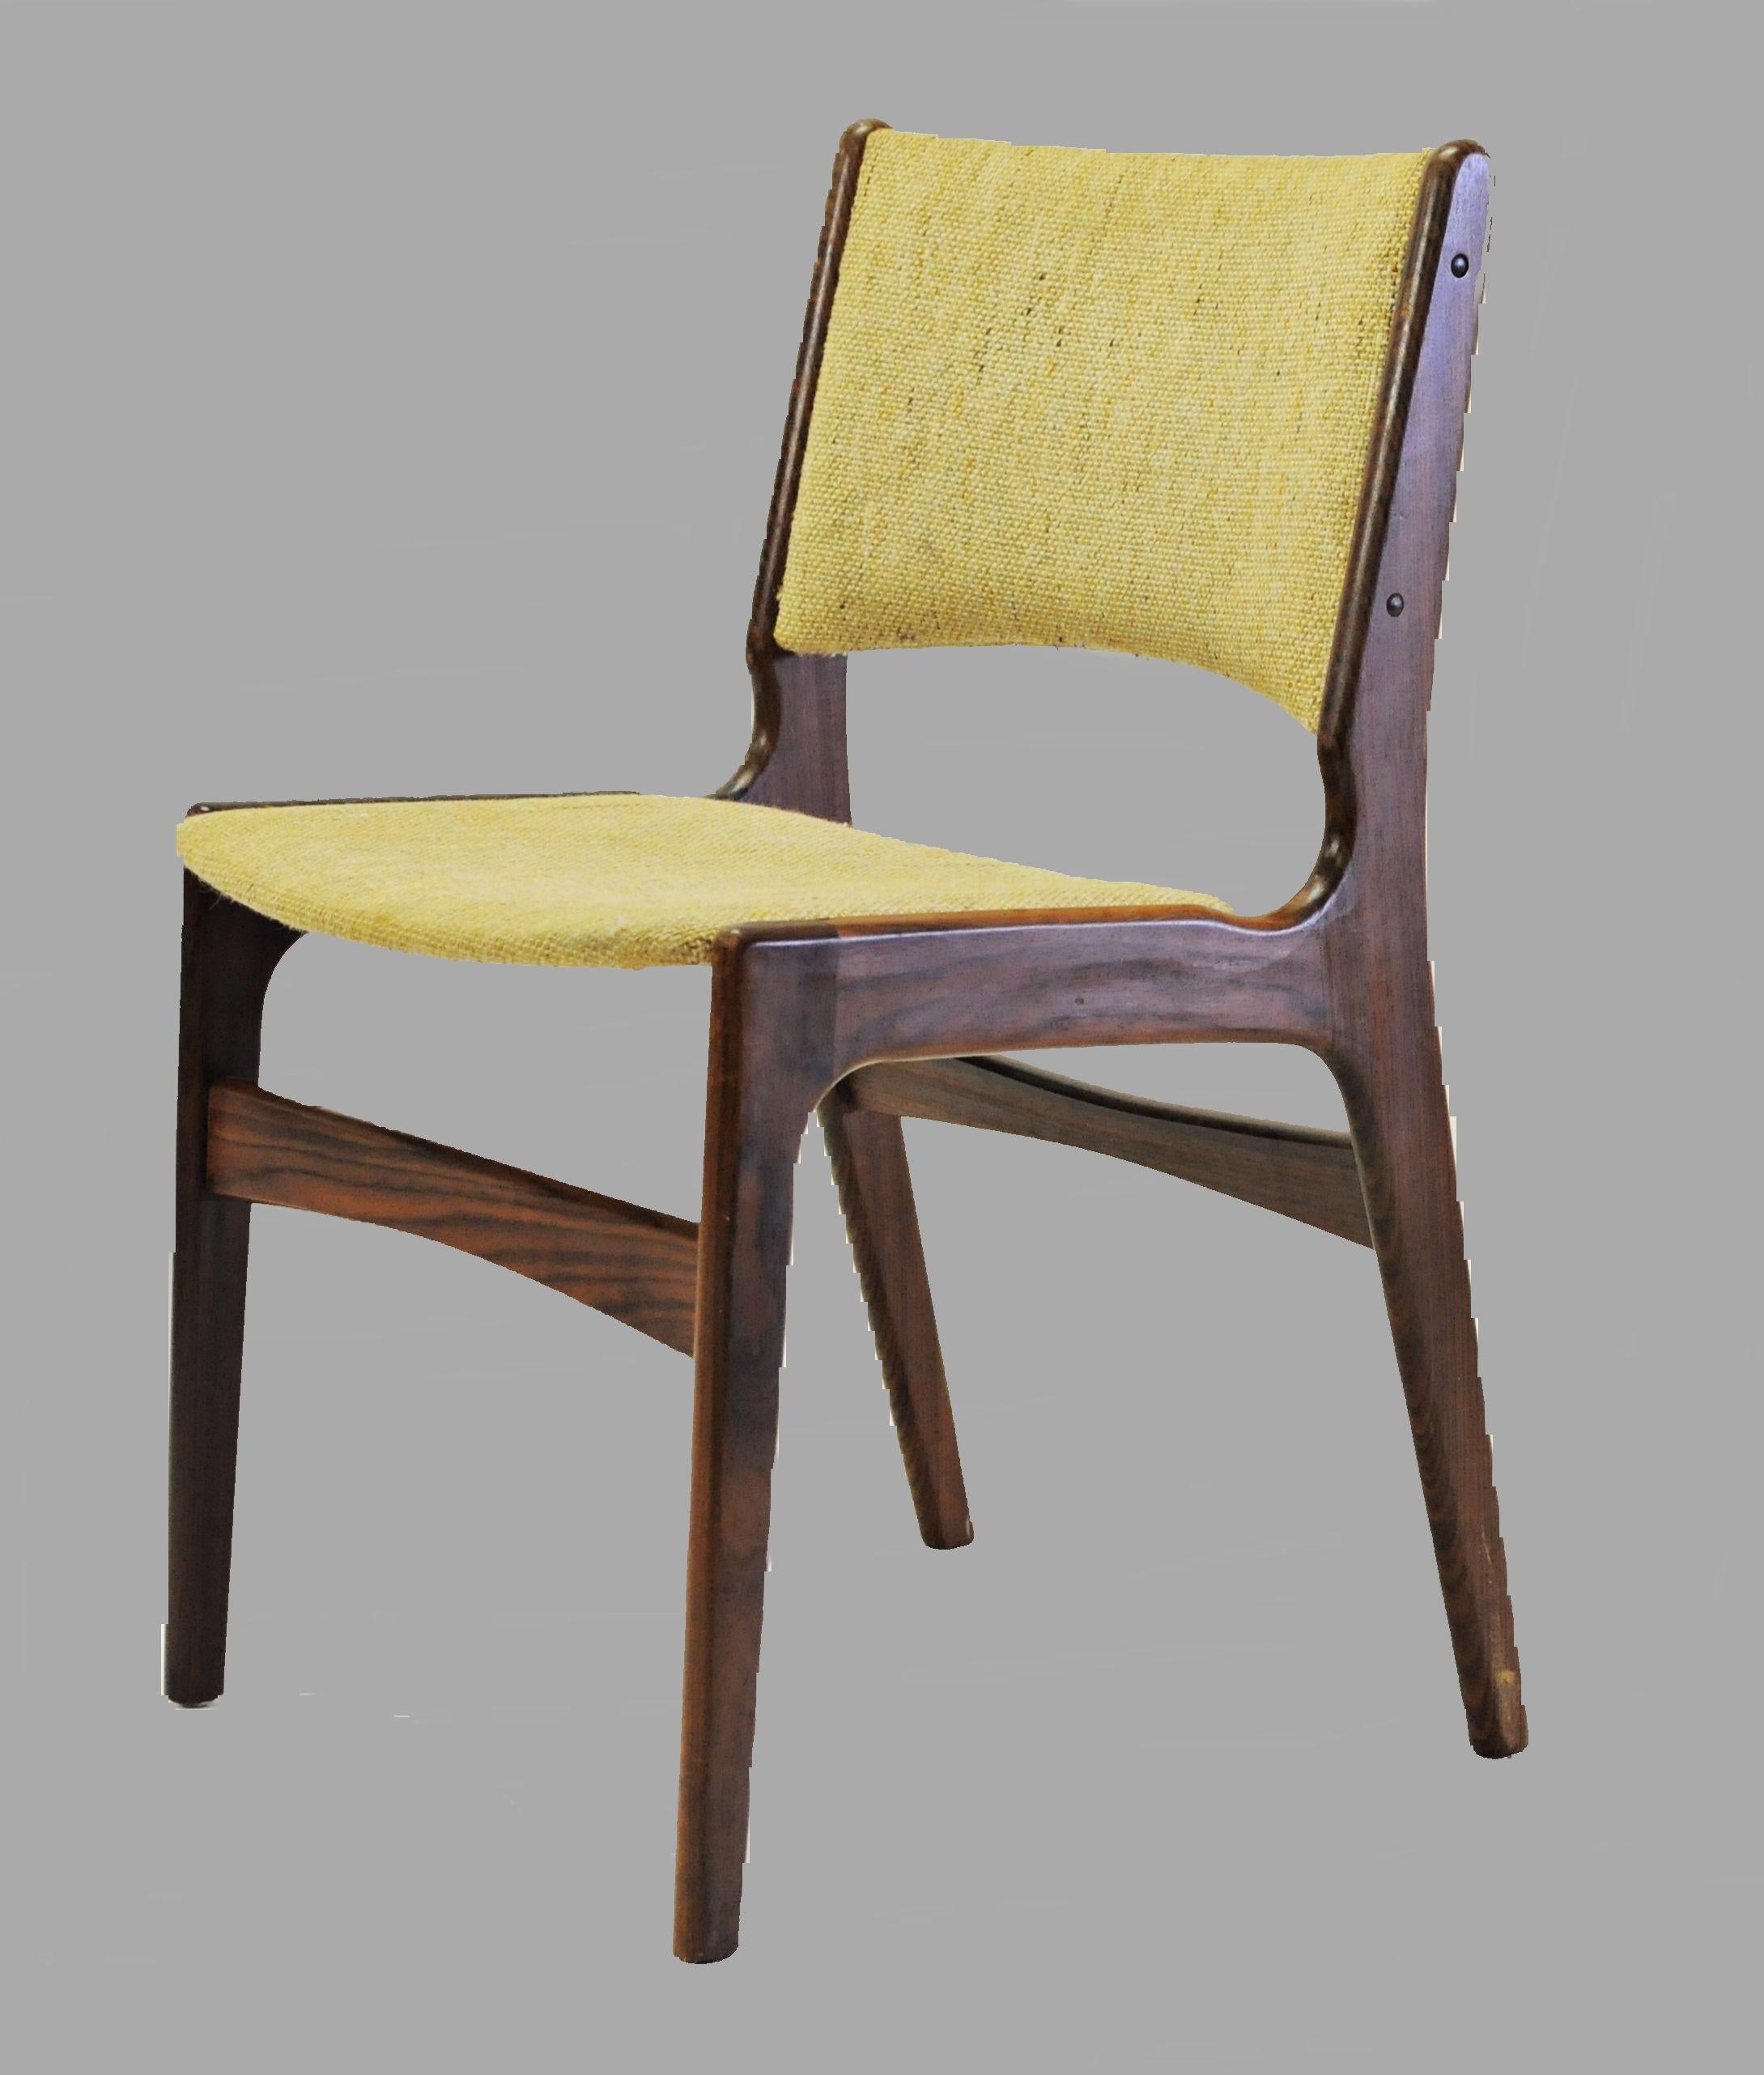 Set of eight Erik Buch dining chairs made by Oddense Maskinsnedkeri.

The chairs feature a solid teak frame and are as all of Erik Buchs chairs characterized by high-quality materials, solid craftsmanship, Scandinavian aesthetic and not least a